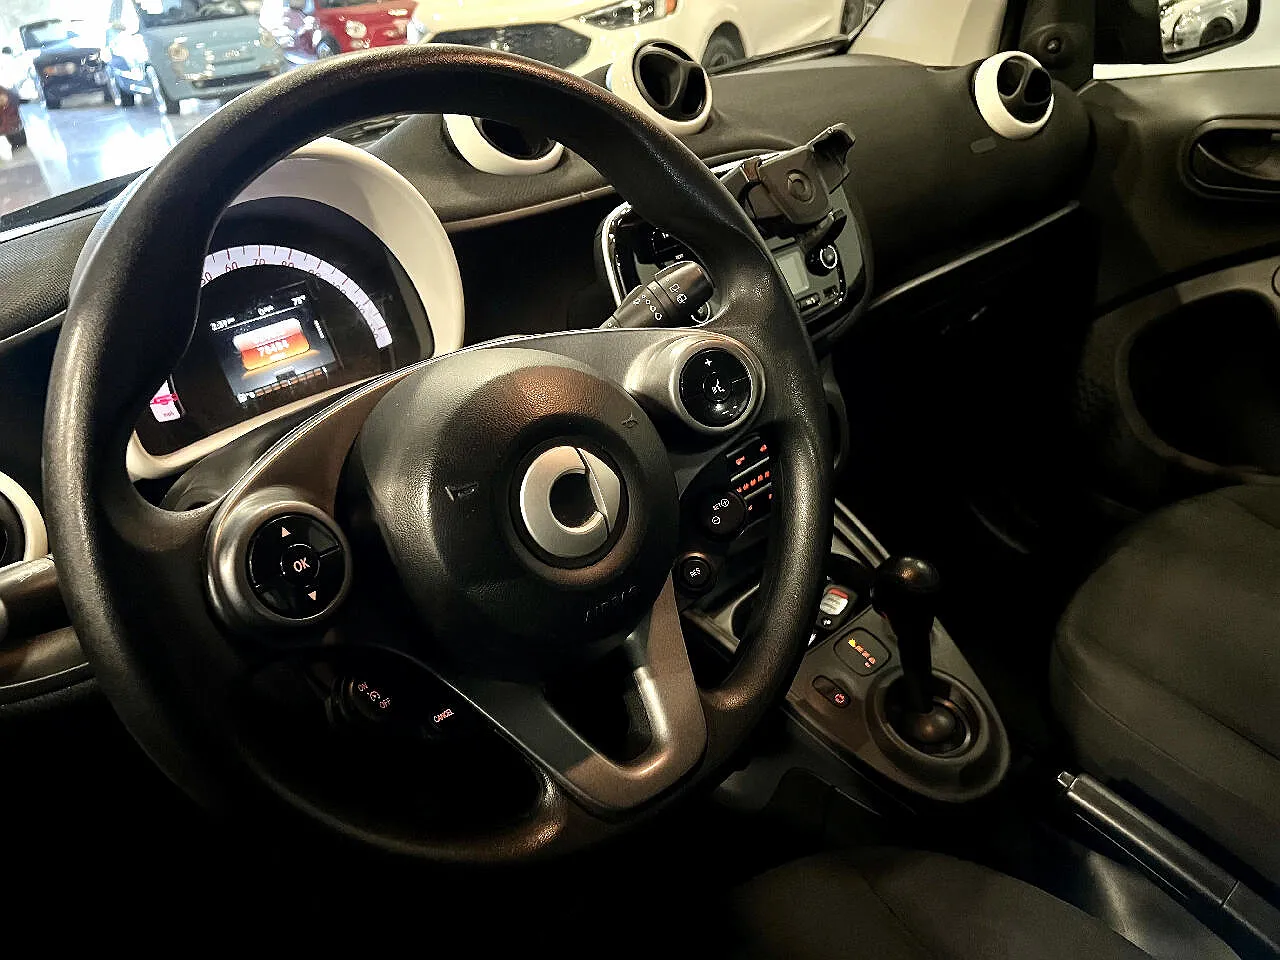 2016 Smart Fortwo Passion image 13